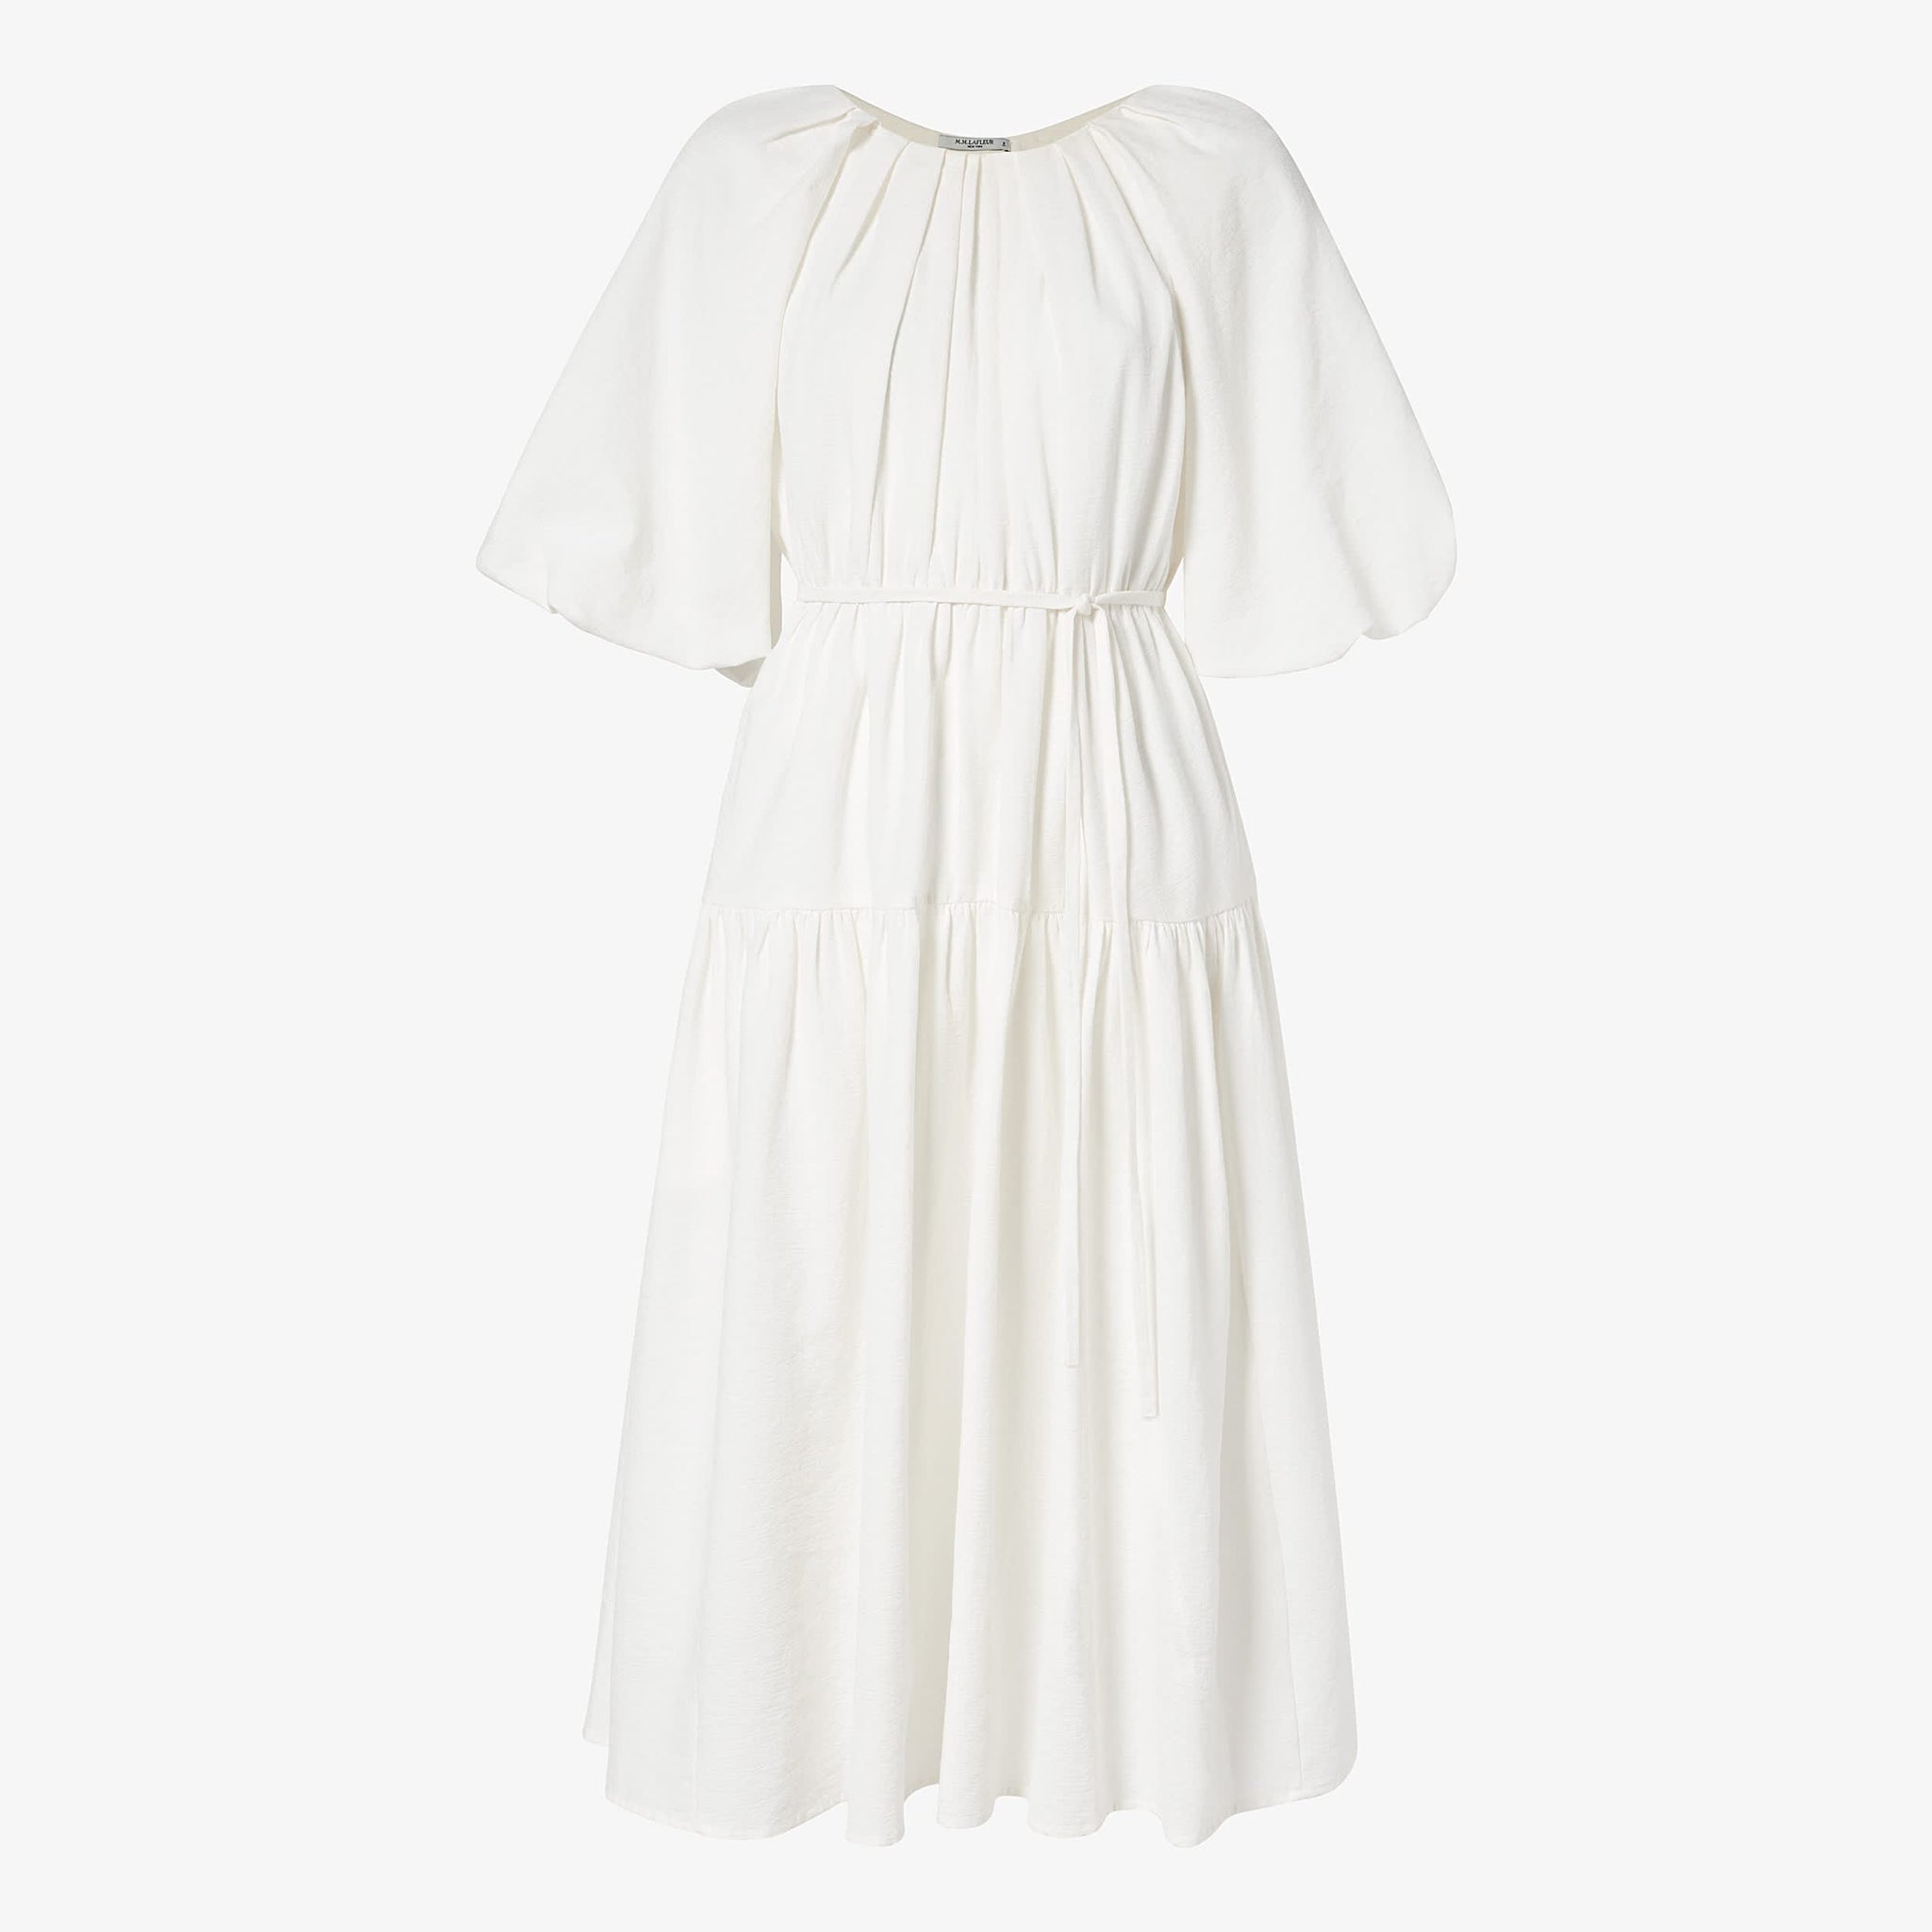 Packshot image of the medina dress in textured voile in ivory